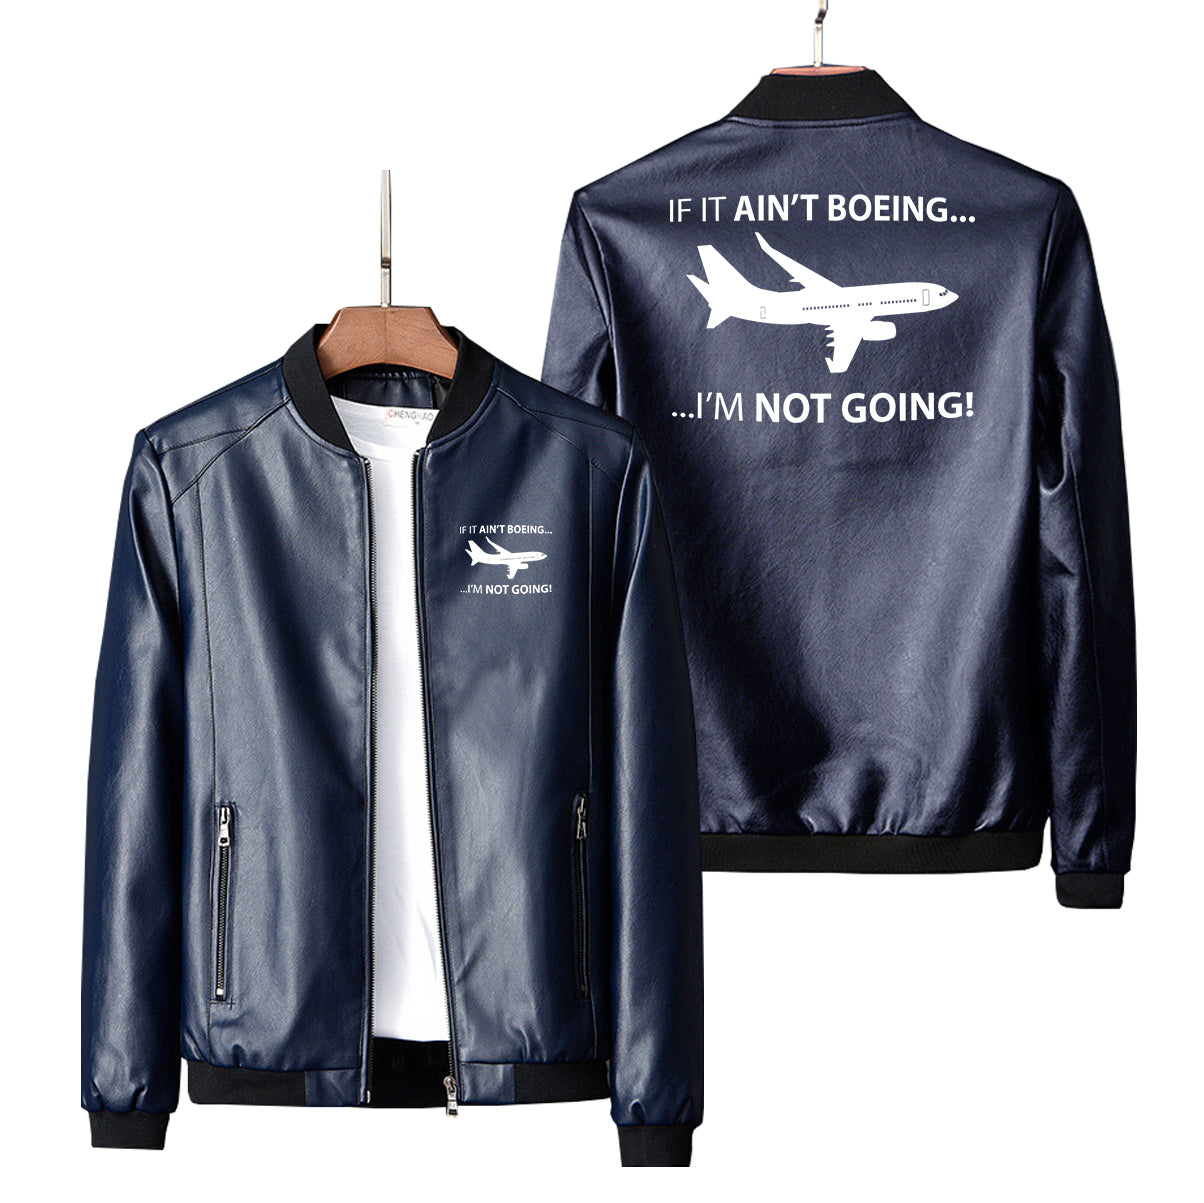 If It Ain't Boeing I'm Not Going! Designed PU Leather Jackets